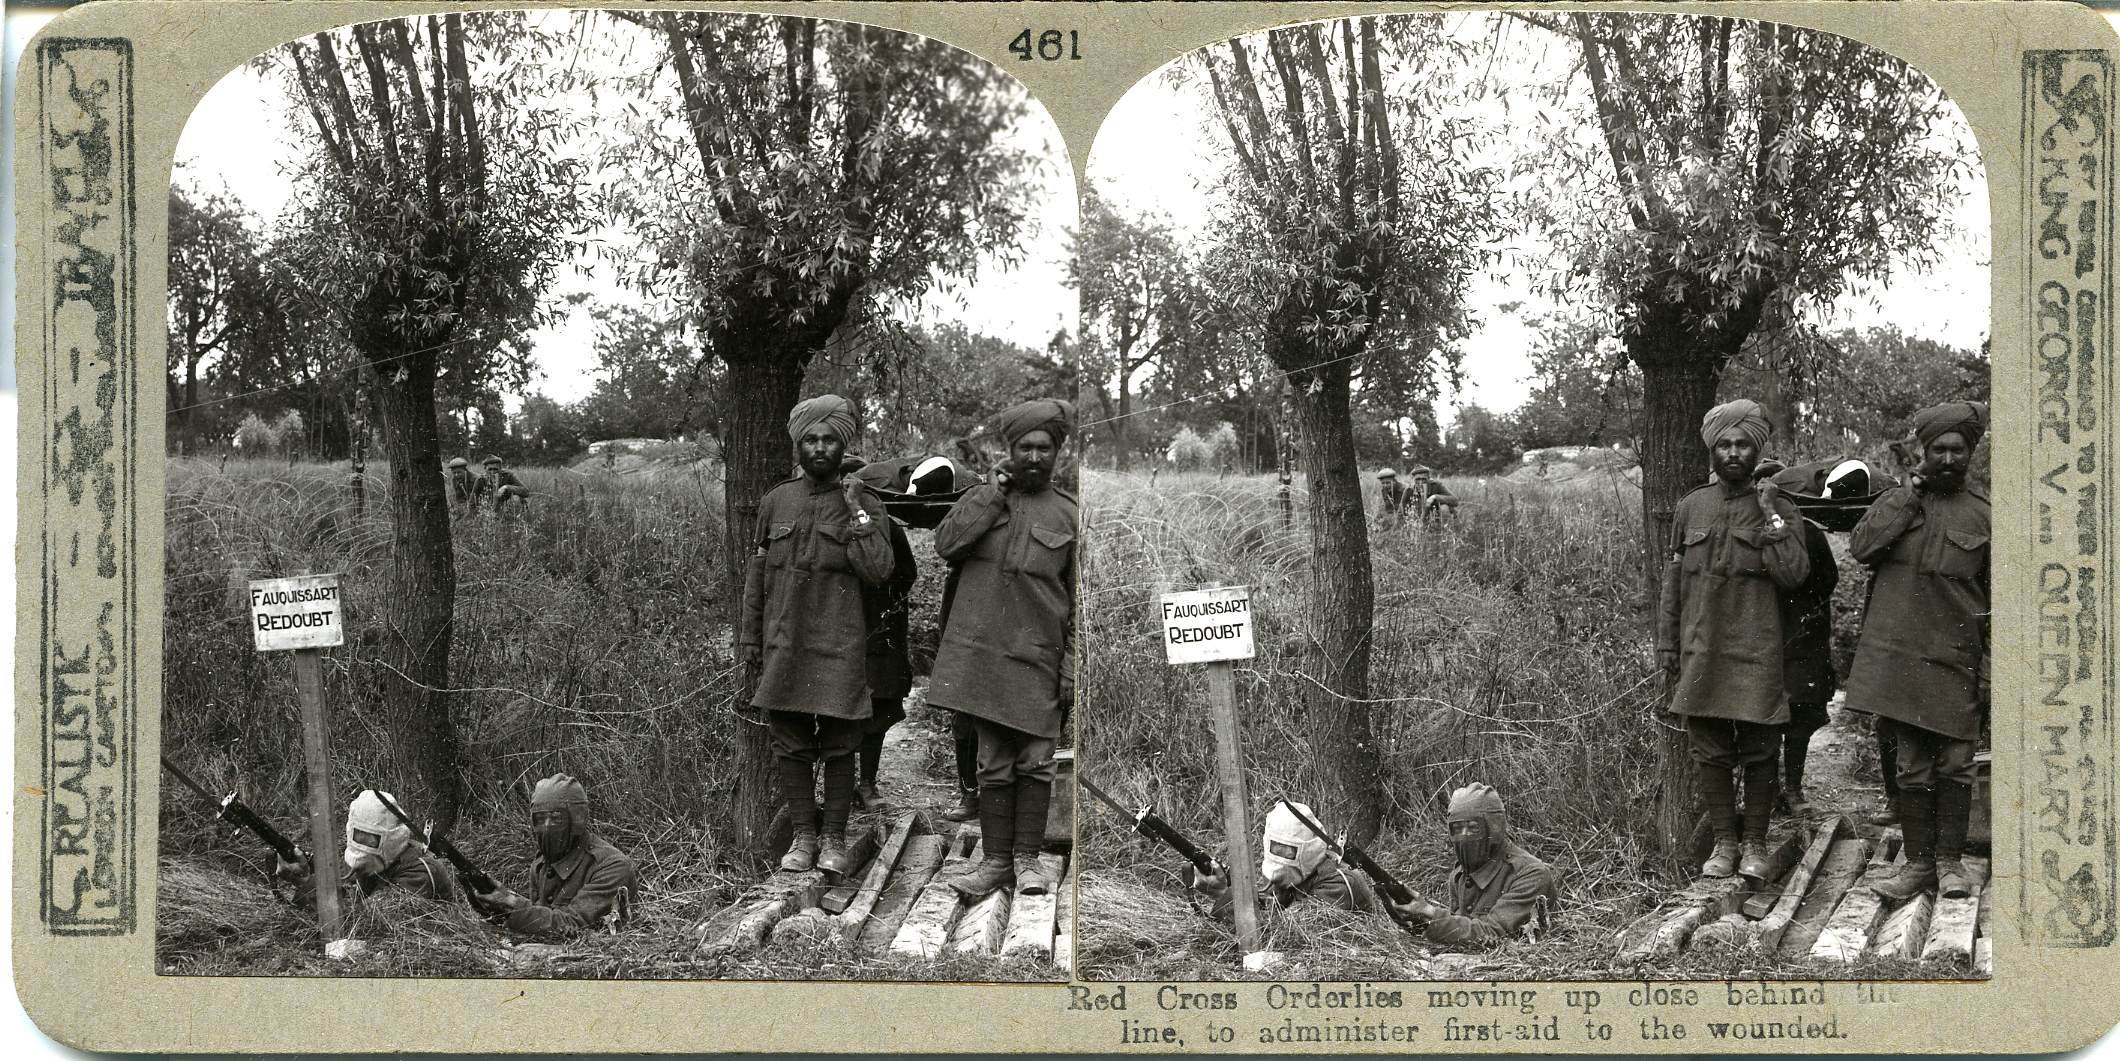 Red Cross Orderlies moving up close behind the line, to administer first-aid to the wounded